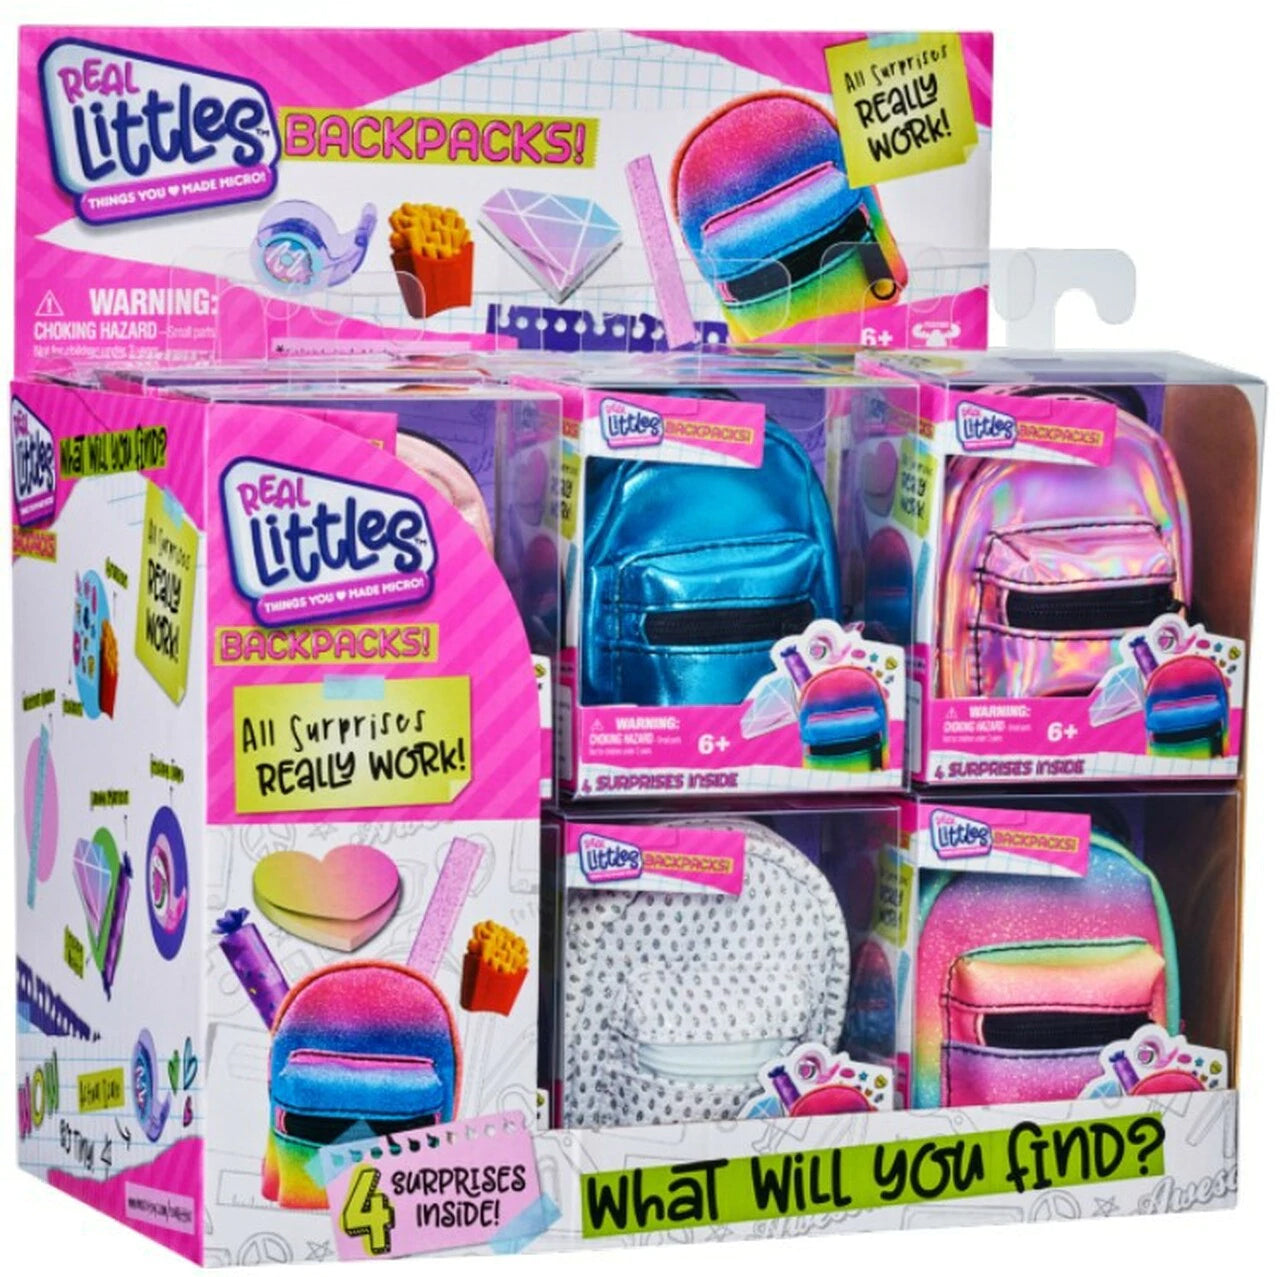  REAL LITTLES Unicorn Travel Pack with Toy Suitcase, Carry Bag,  Unicorn Journal and 15 Surprise Toy Accessories Inside -  Exclusive :  Toys & Games